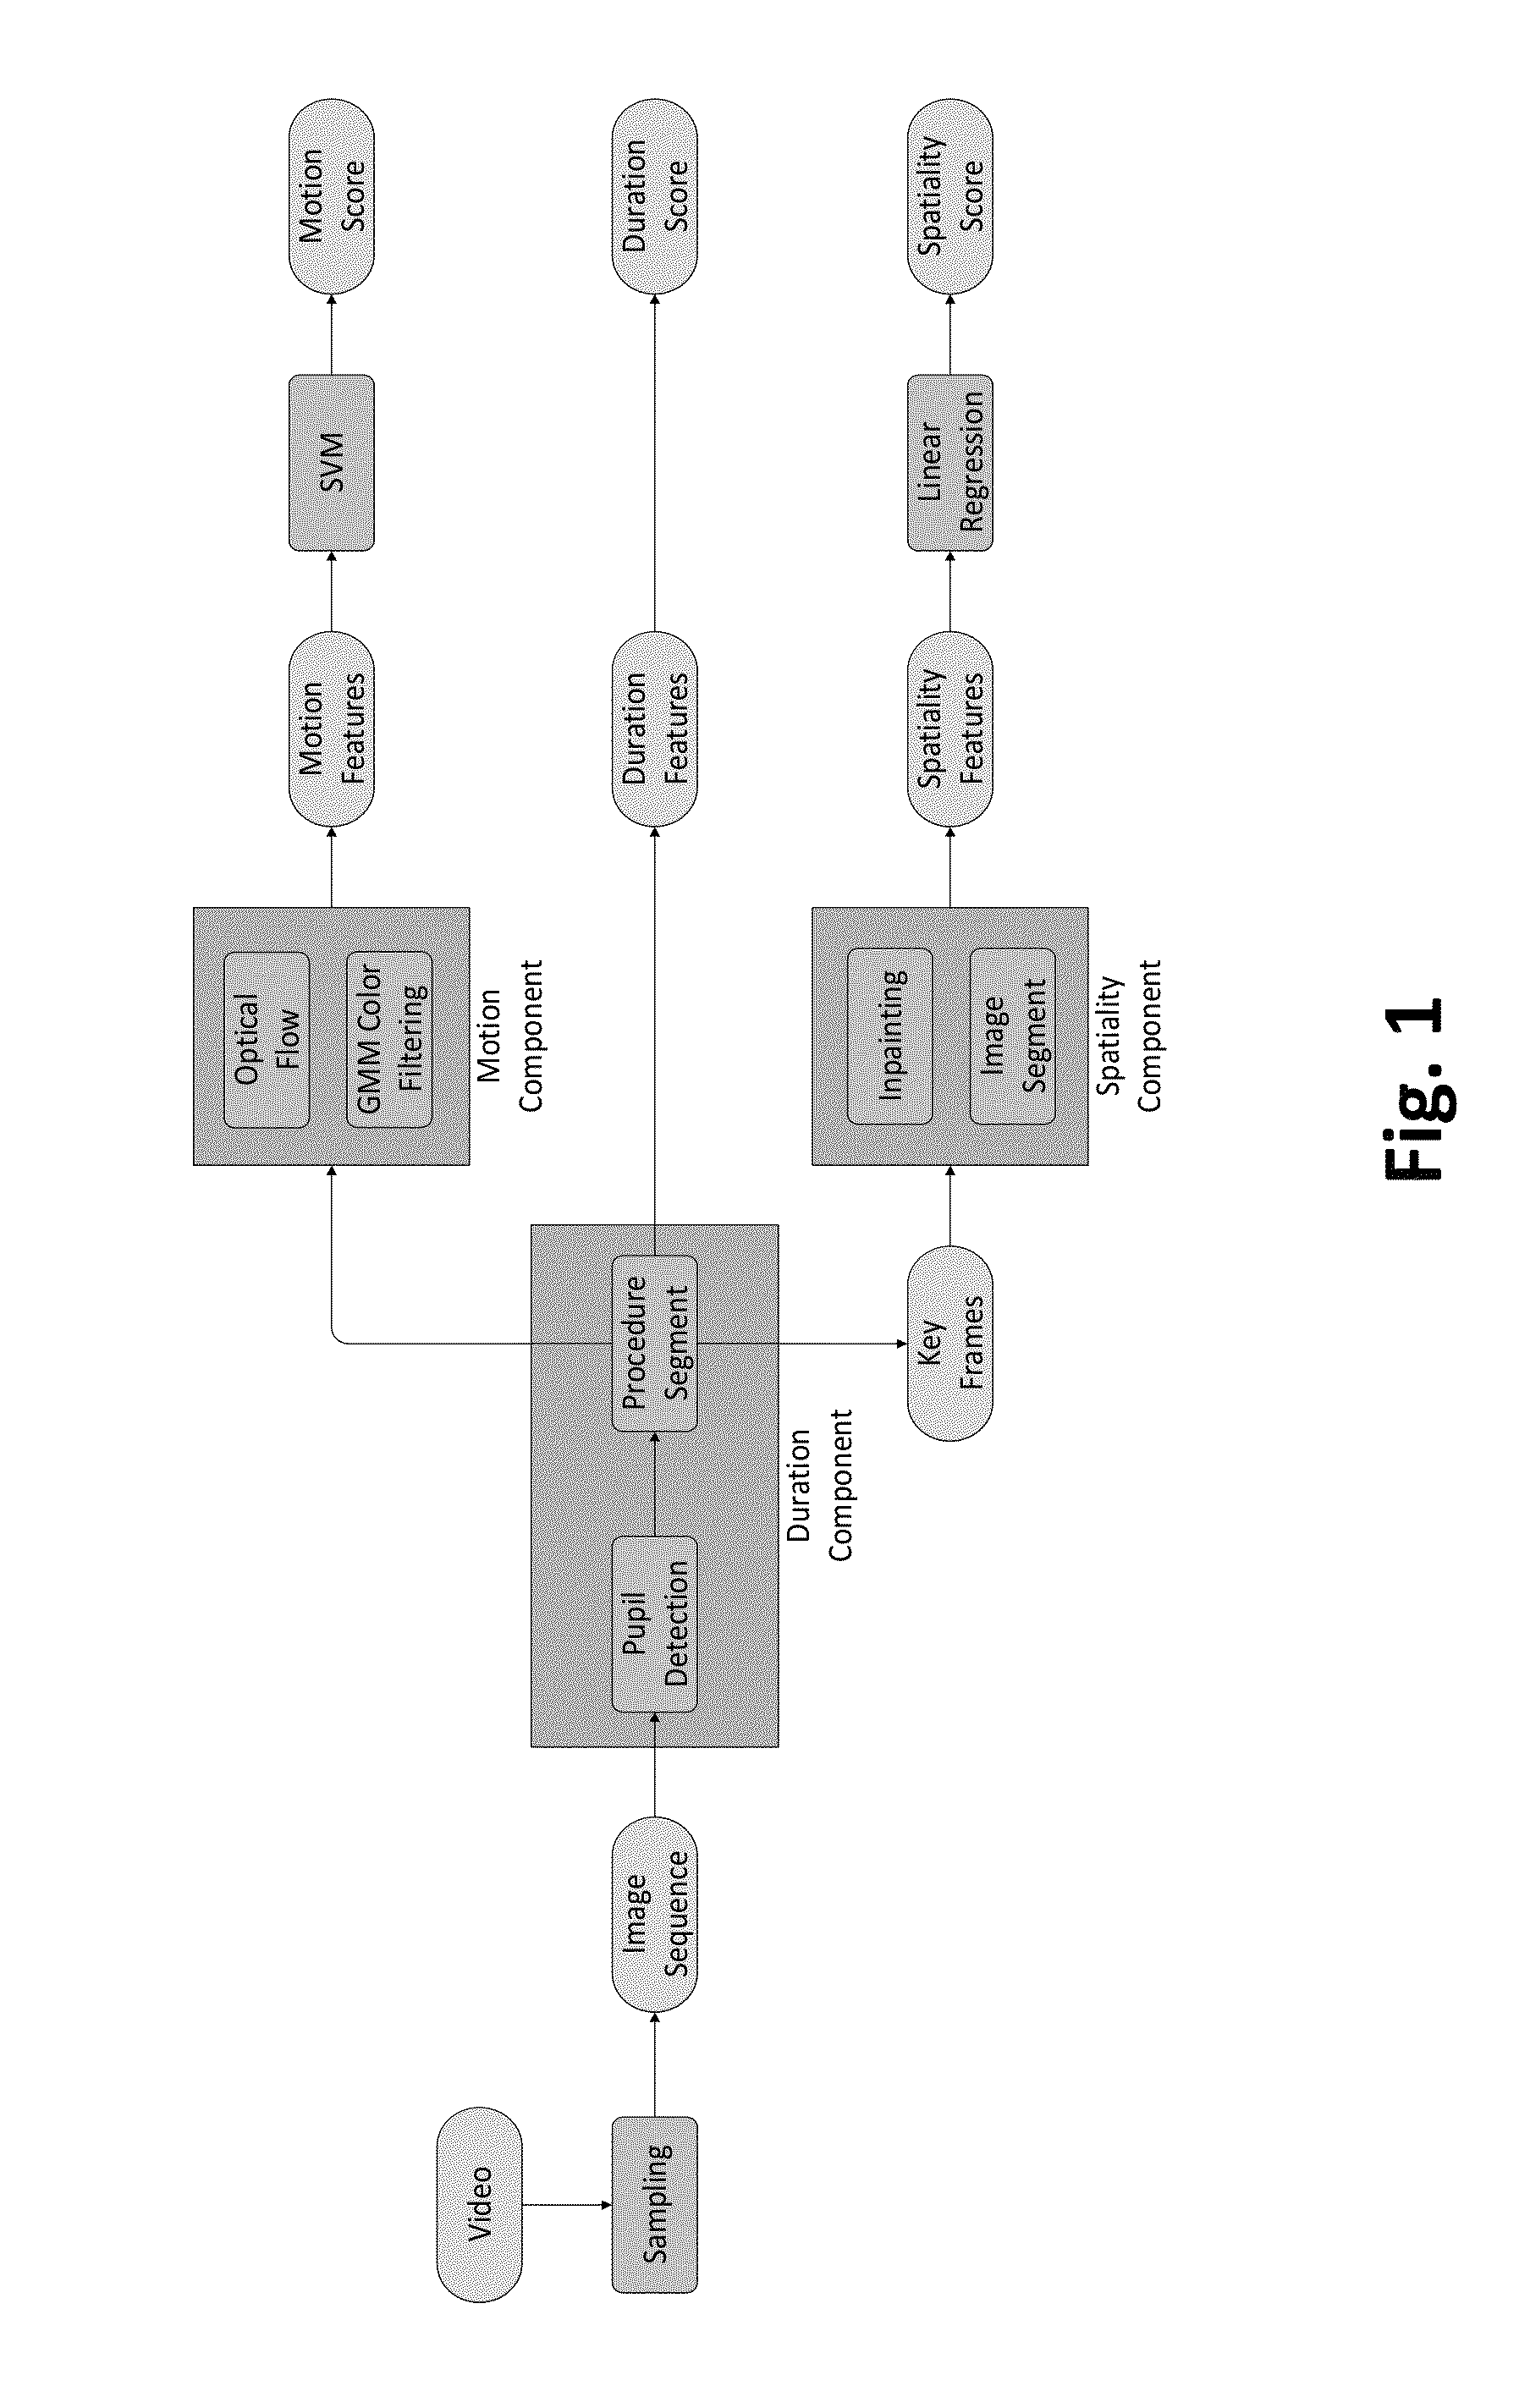 Computer vision based method and system for evaluating and grading surgical procedures